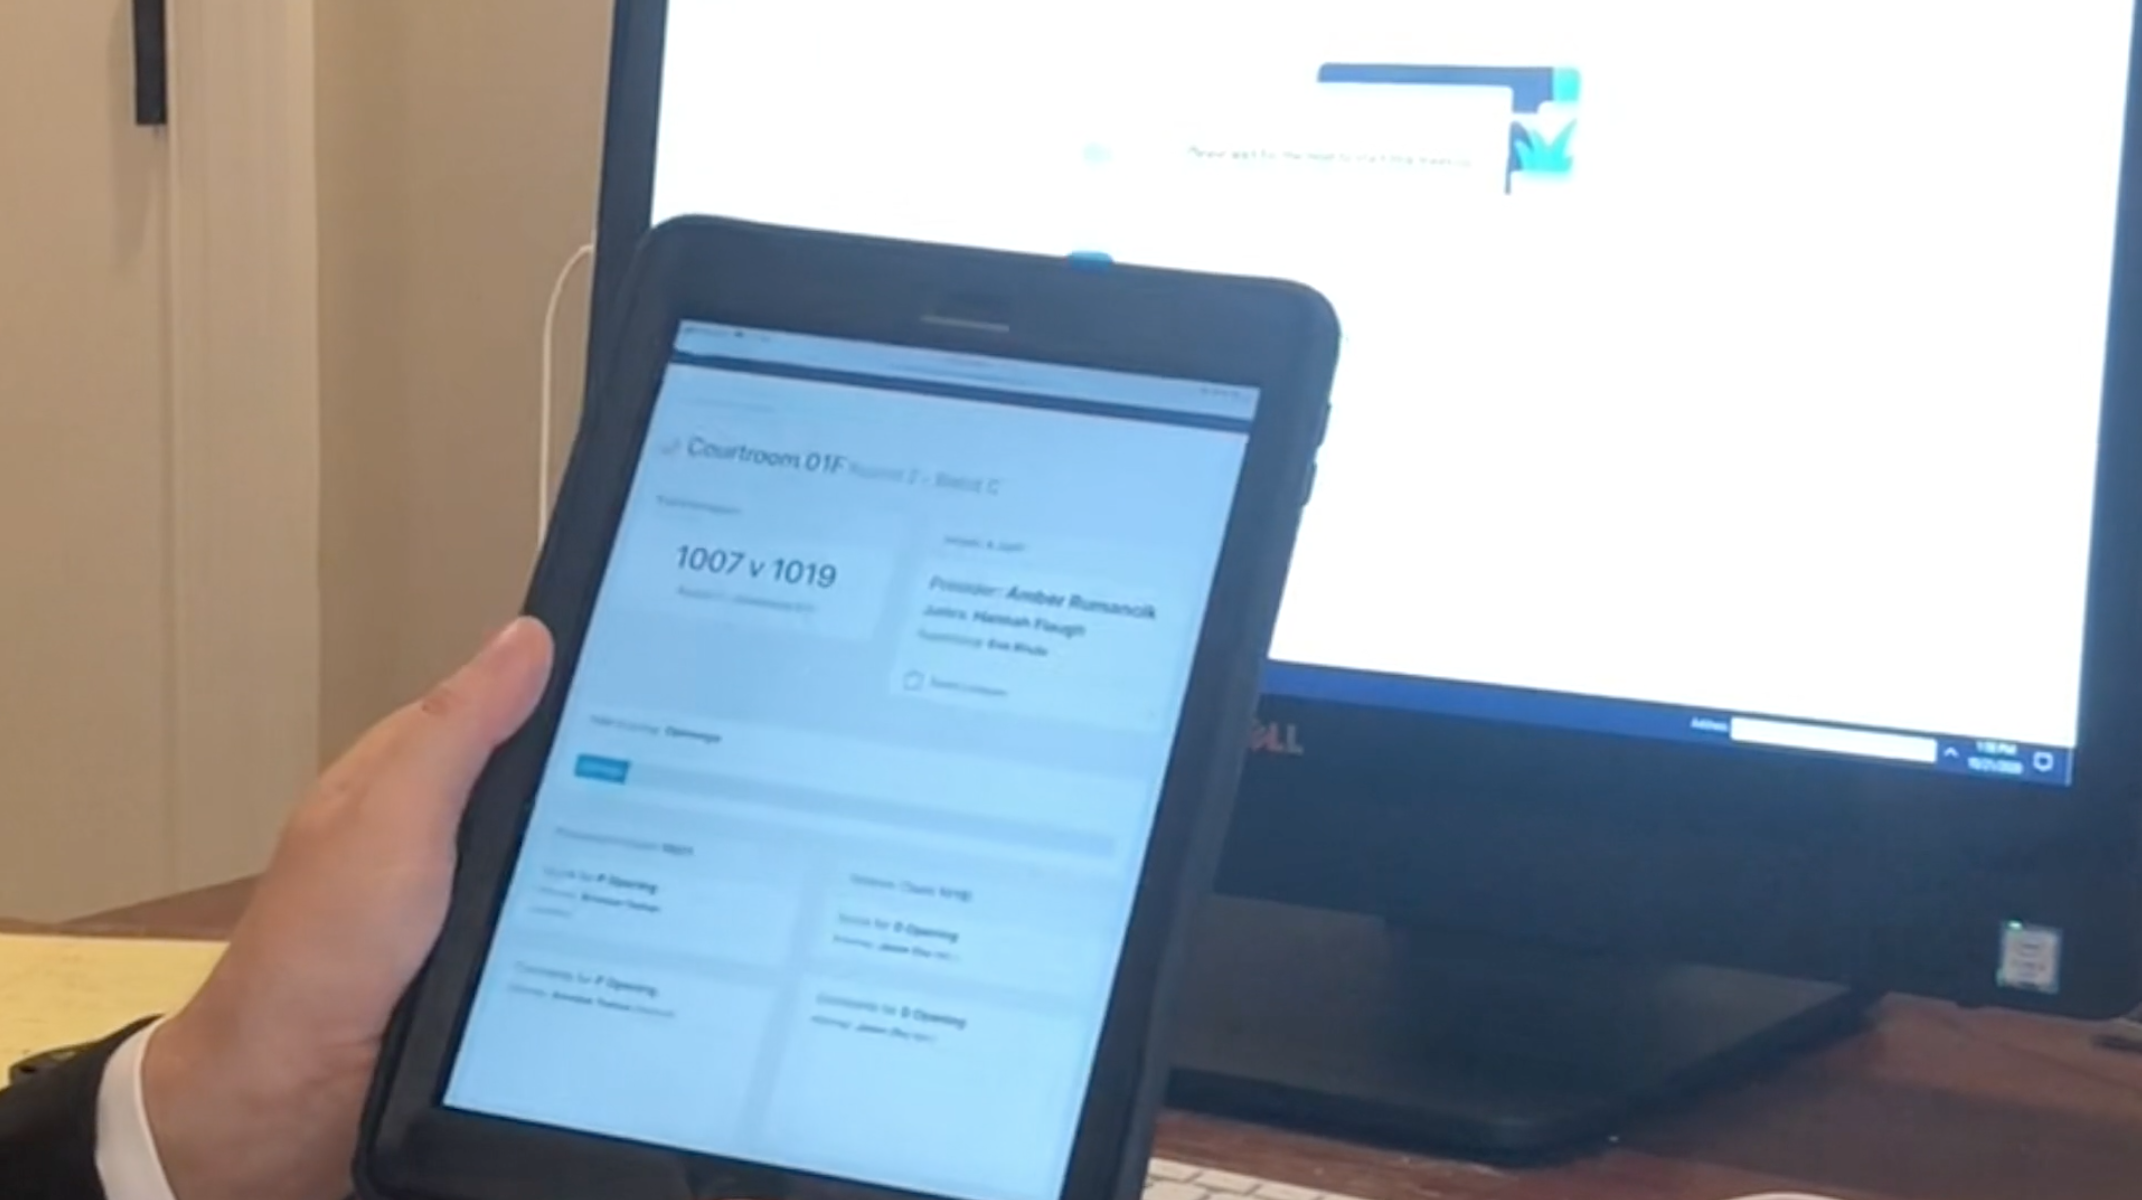  Judges can fill out their ballot on a tablet or mobile device while watching the trial on a computer.&nbsp; 